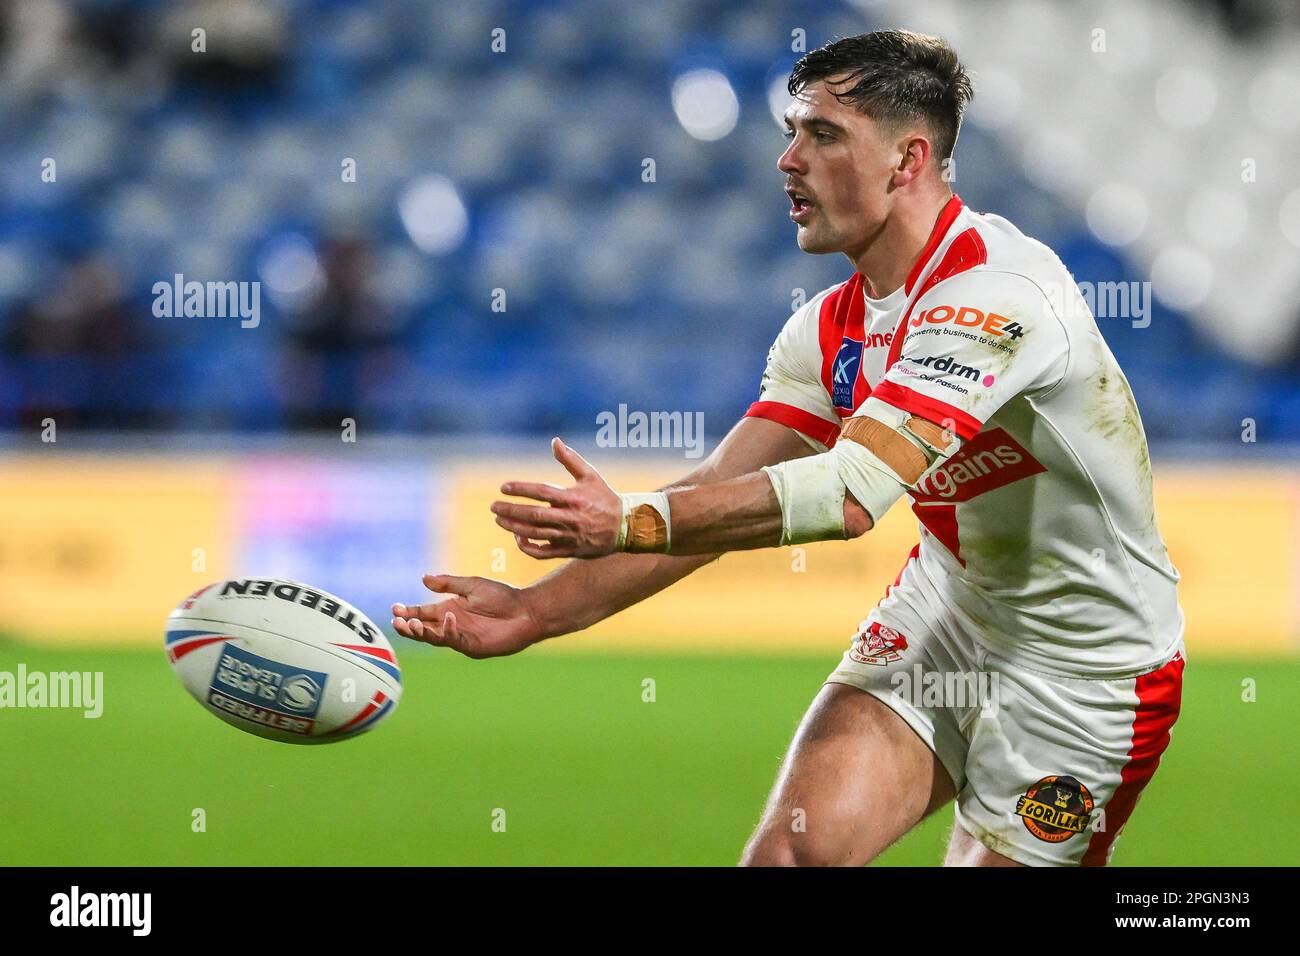 Lewis Dodd #7 of St Helens in action during the Betfred Super League Round 6 match Huddersfield Giants vs St Helens at John Smith's Stadium, Huddersfield, United Kingdom, 23rd March 2023  (Photo by Craig Thomas/News Images) Stock Photo